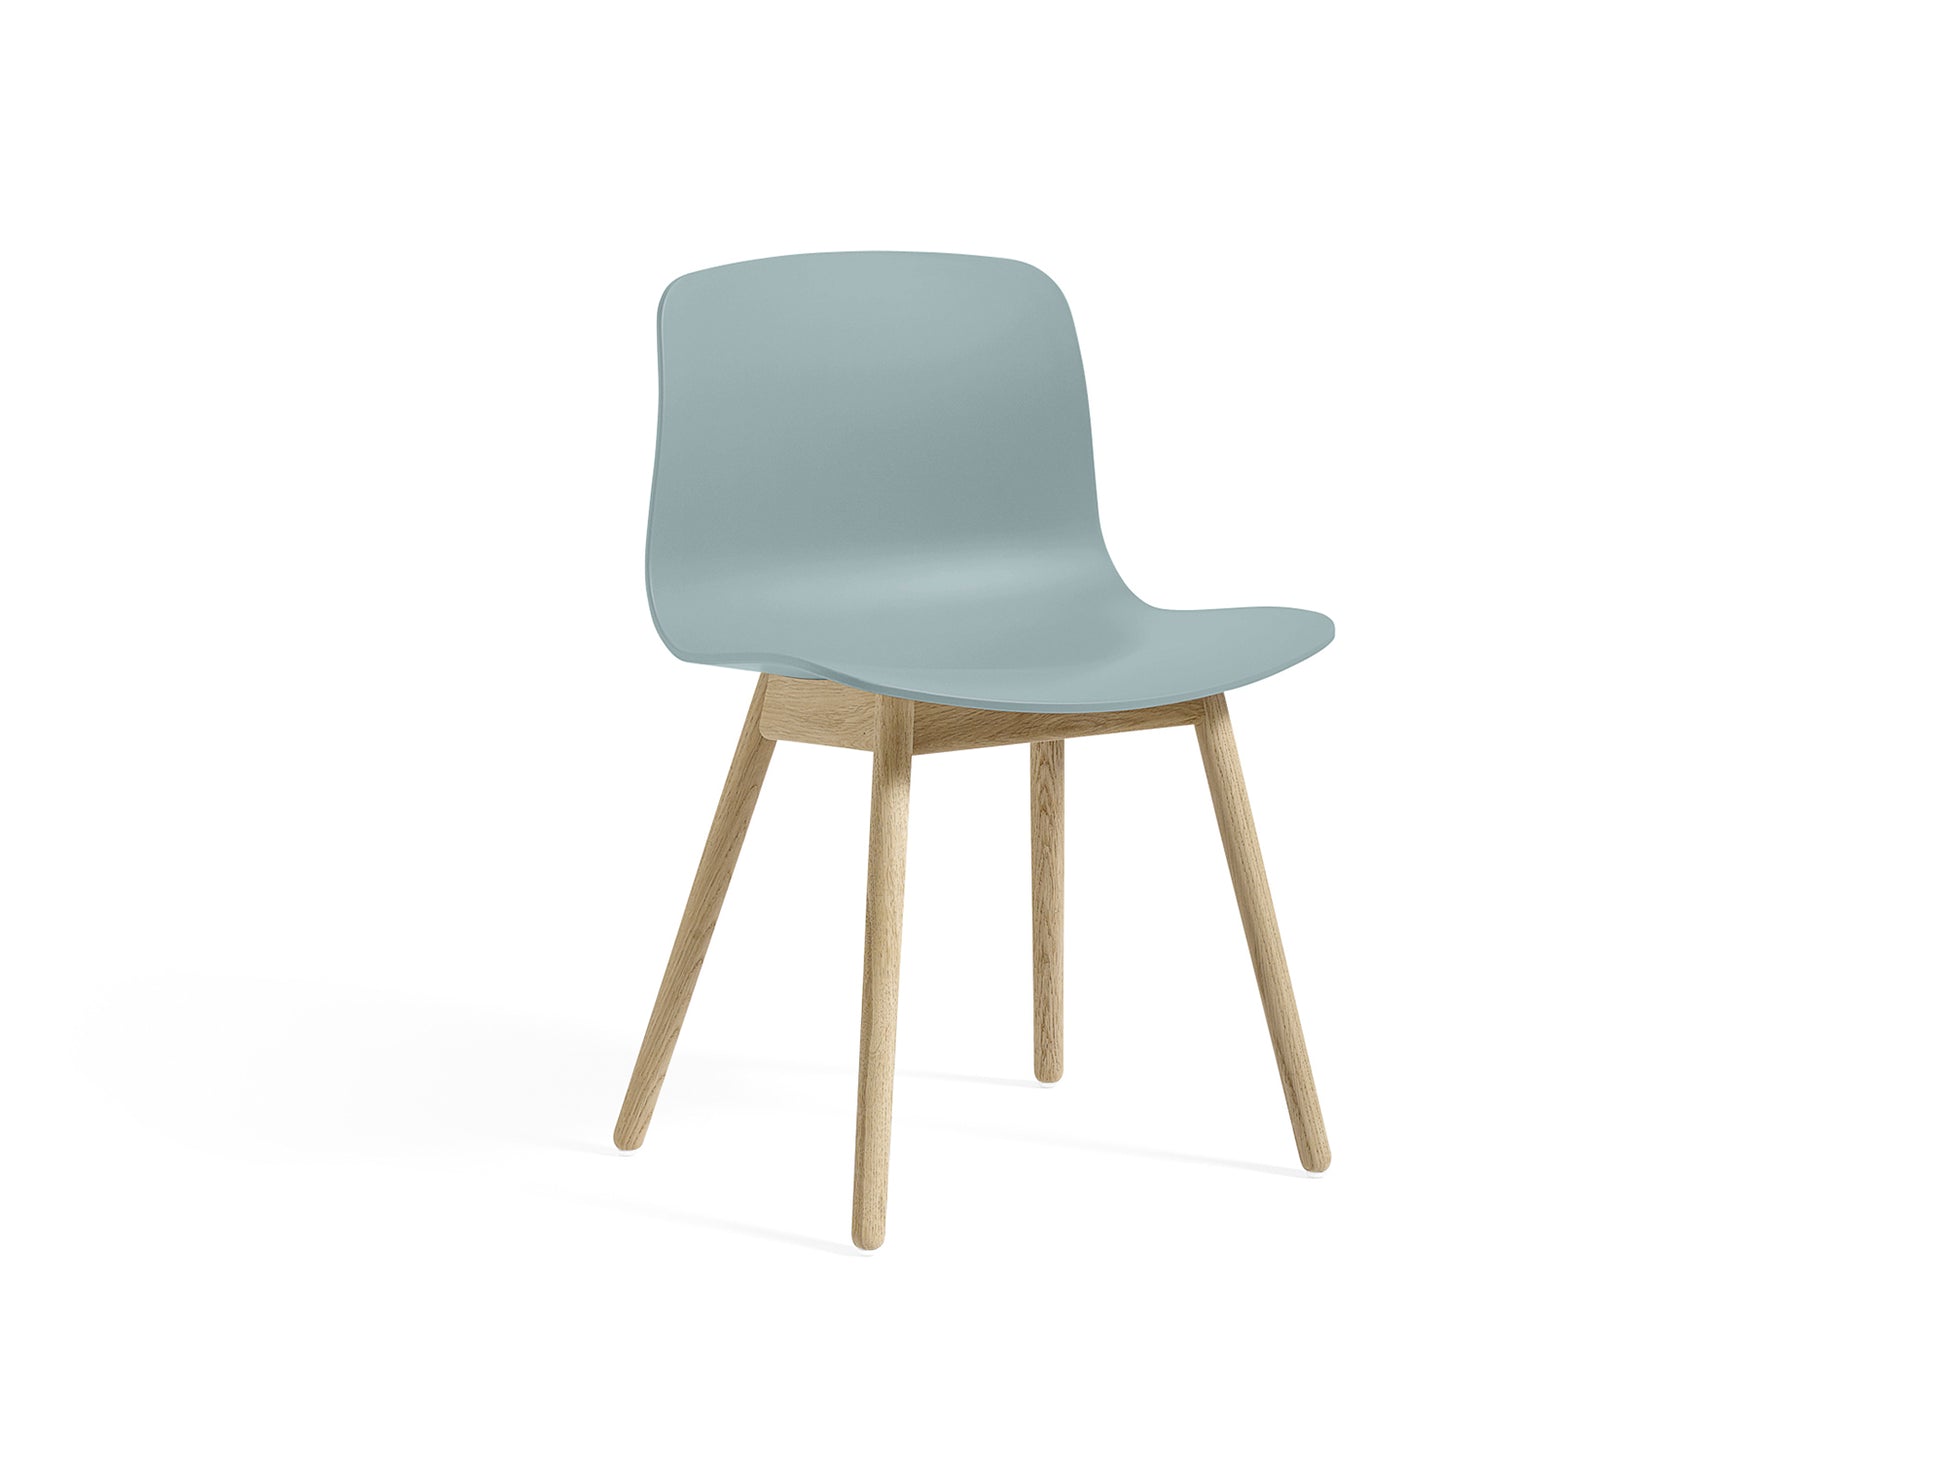 About A Chair AAC 12 by HAY - Dusty Blue 2.0 Shell / Soaped Oak Base